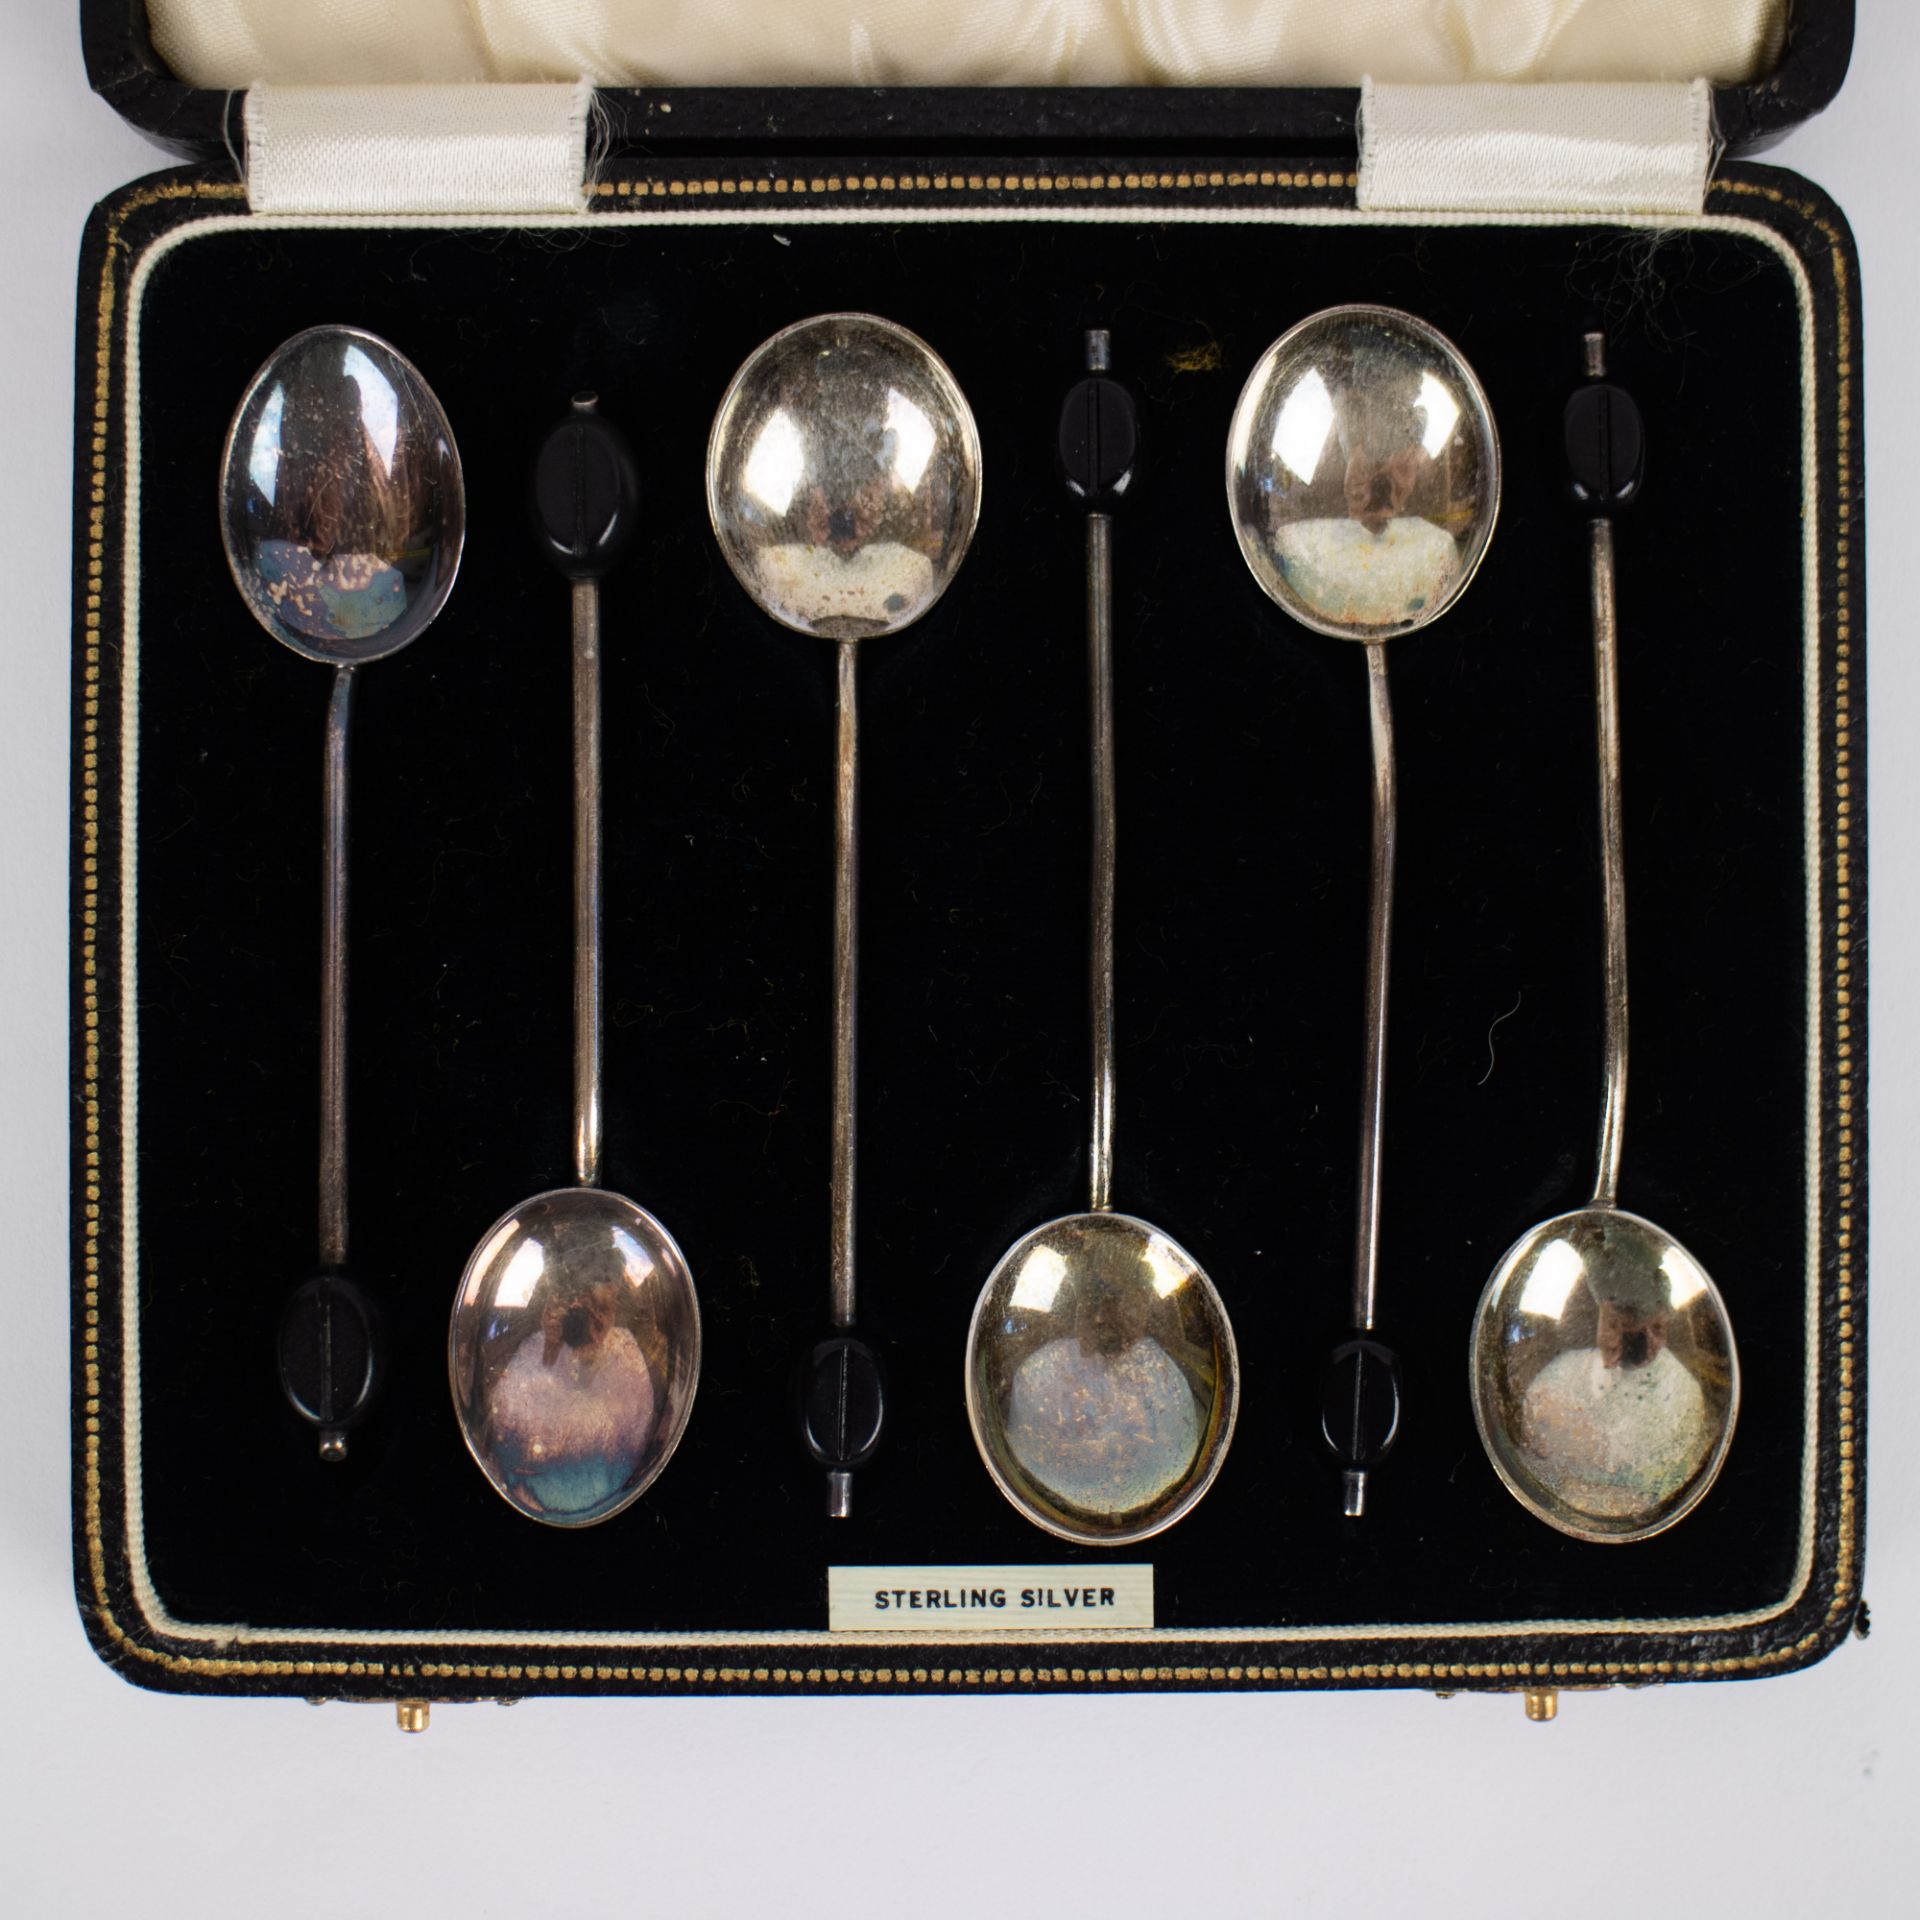 6 Serling silver spoons and 2 silver pocket watches - Image 2 of 4